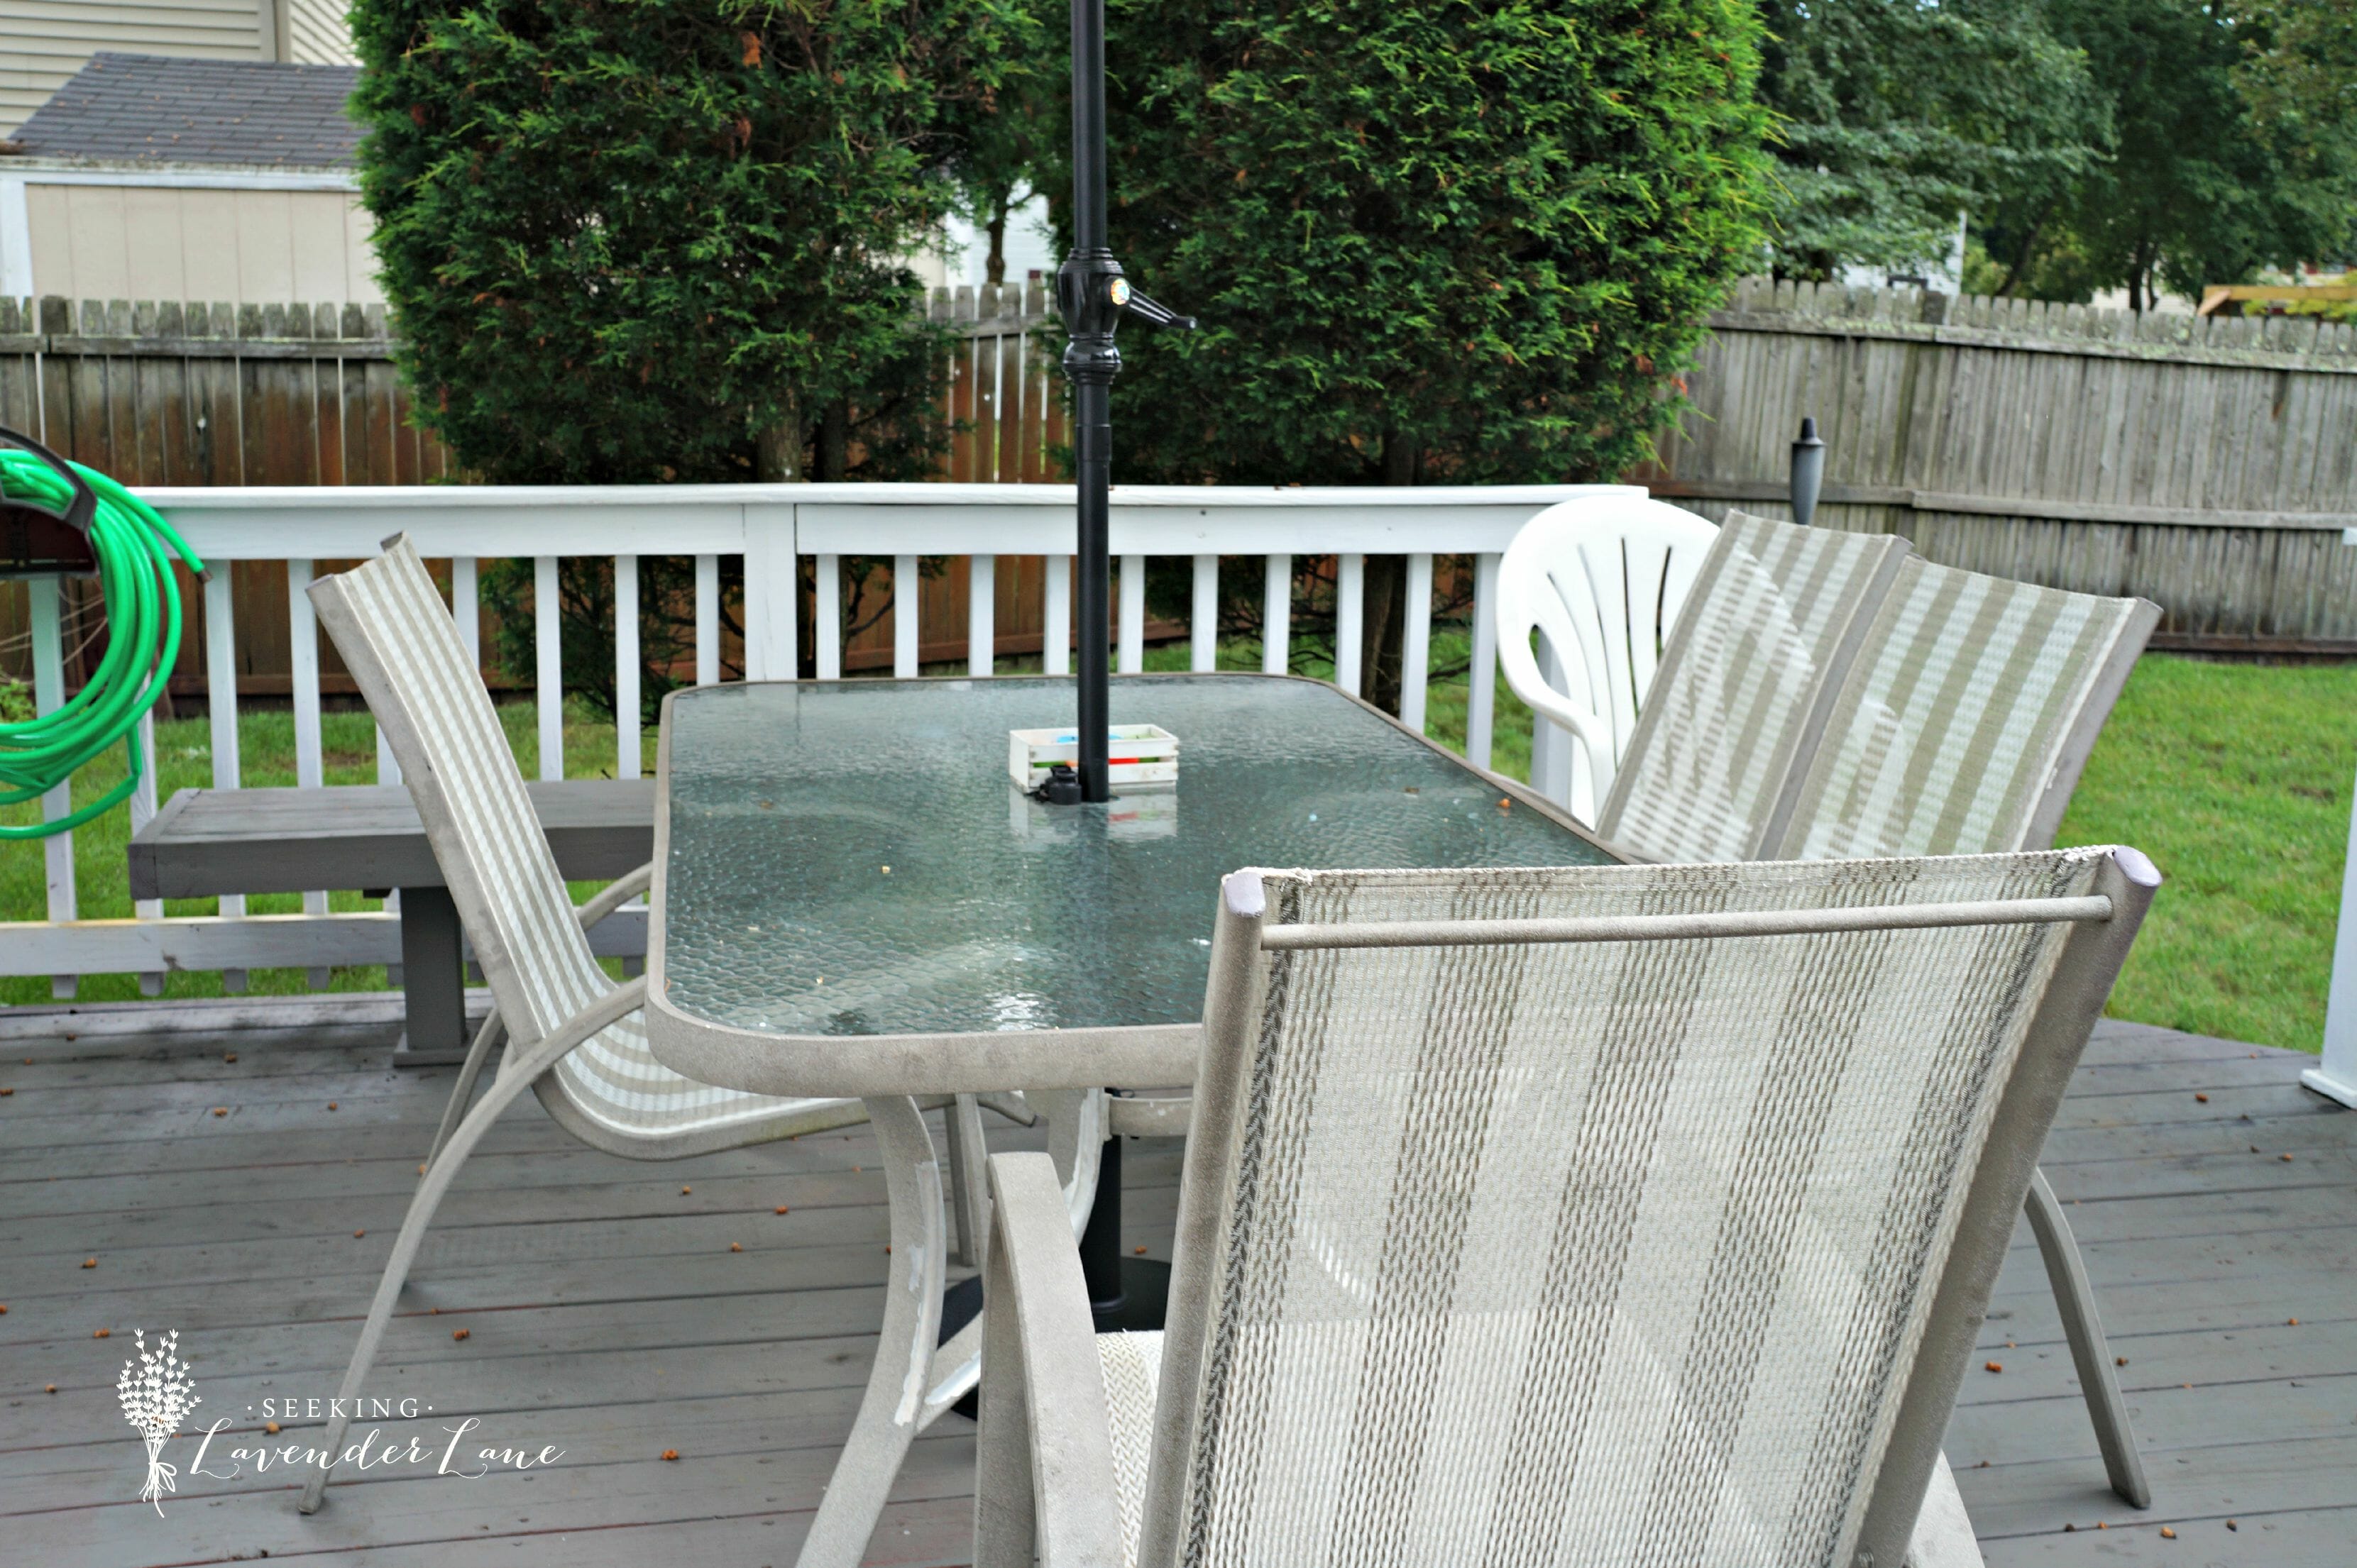 Cheap Home Decor How To Update An Outdated Outdoor Furniture